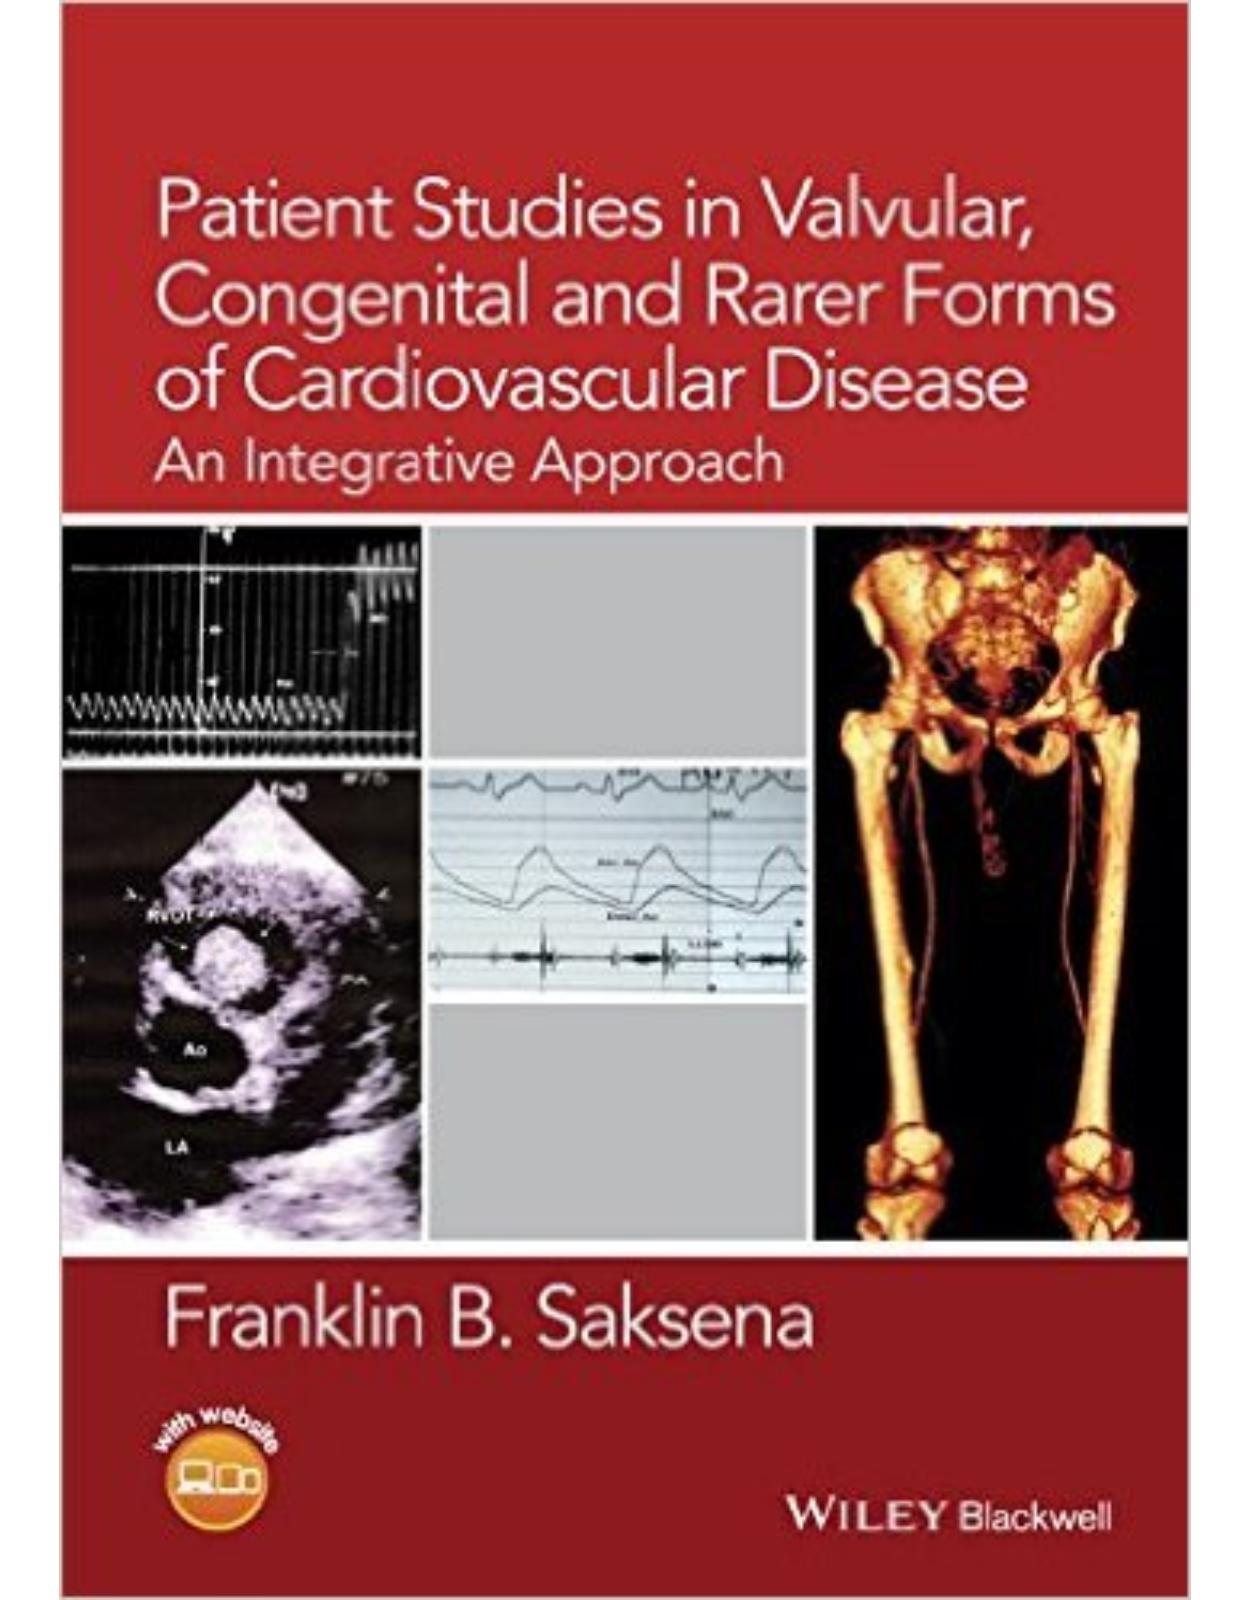 Patient Studies in Valvular, Congenital and Rarer Forms of Cardiovascular Disease: An Integrative Approach 1st Edition